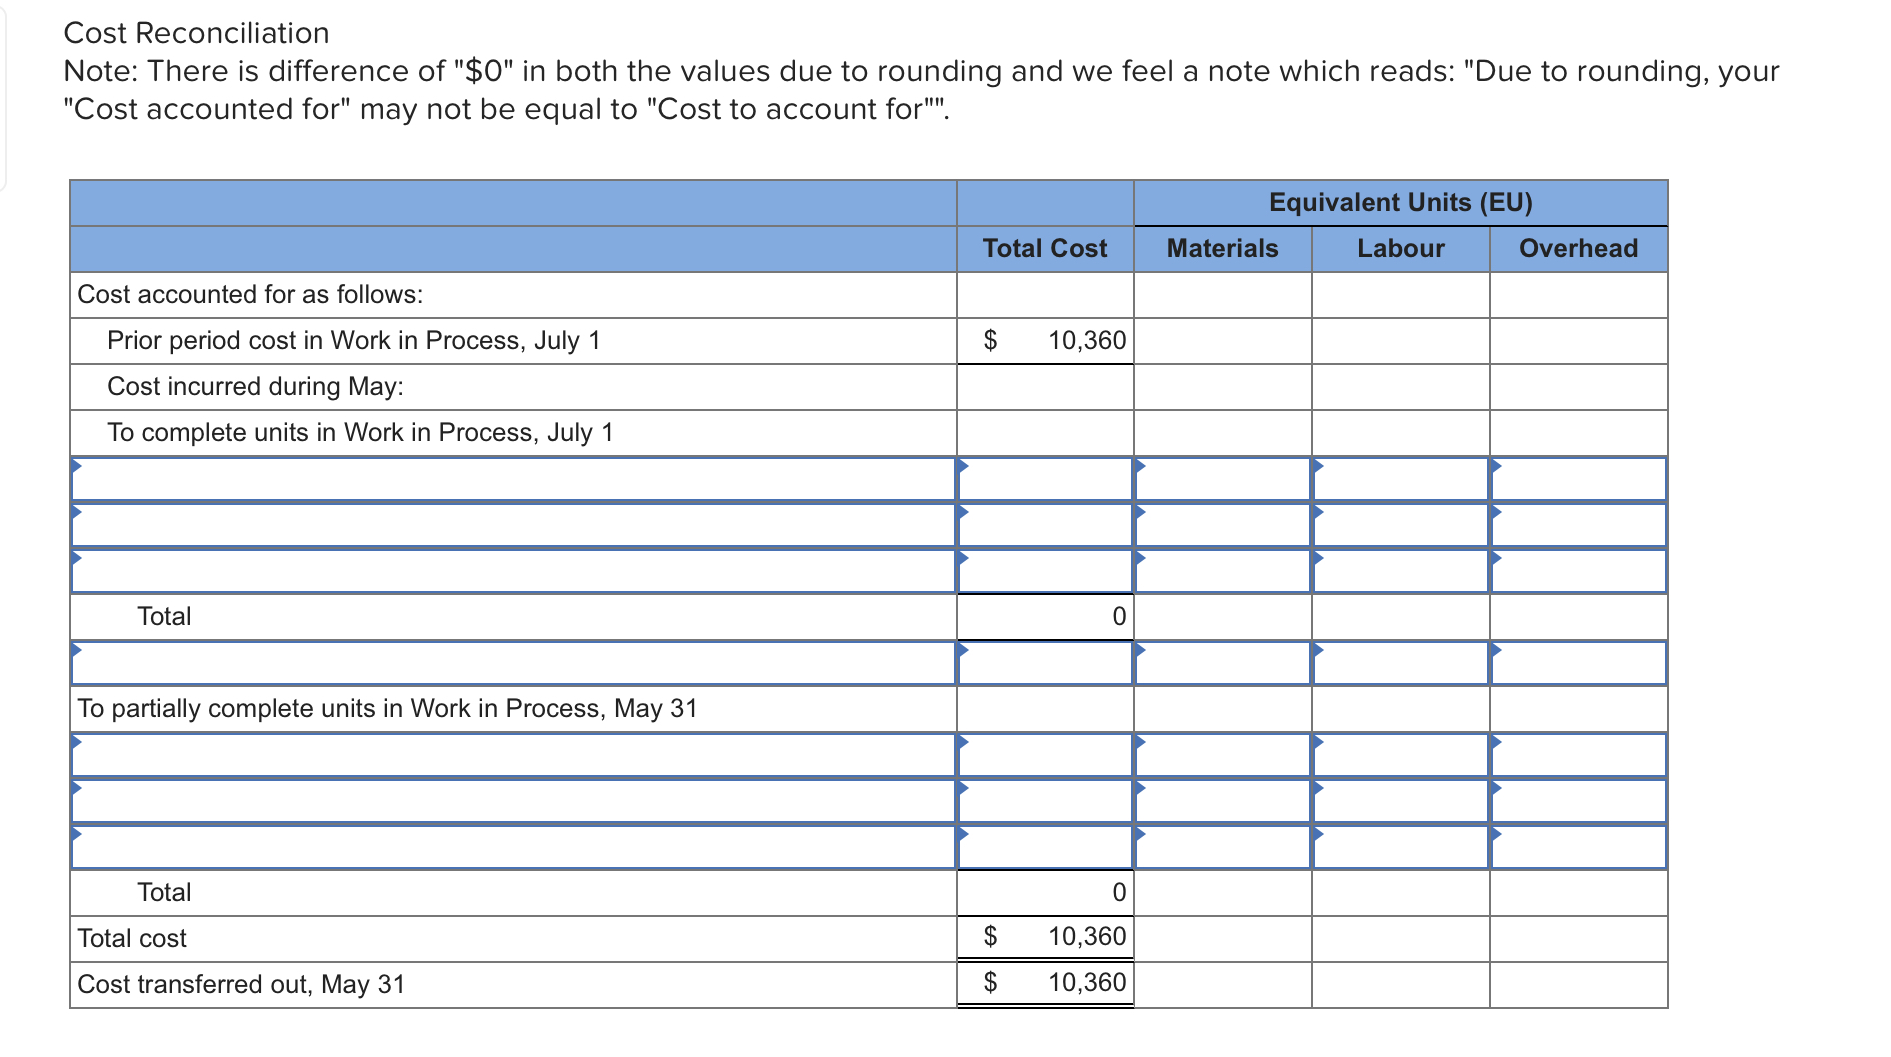 Cost Reconciliation Note: There is difference of "$0" in both the values due to rounding and we feel a note